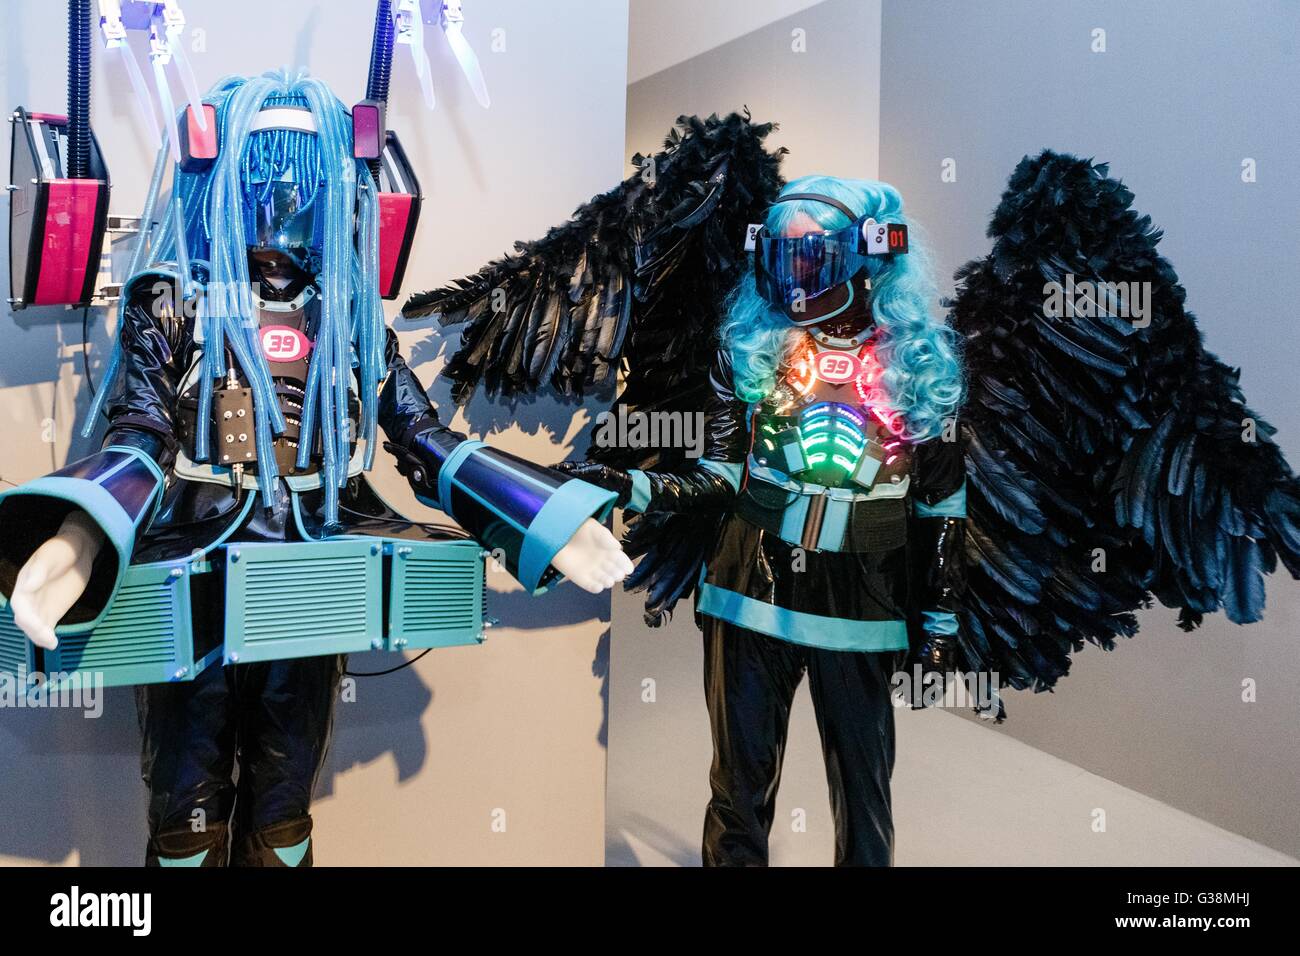 Costume player Rudolf Arnold poses next to the costume of virtual hit singer, Miku Hatsune, at the exhibition 'Hokusai Manga, Japanese pop culture since 1680' at the museum for arts and industry in Hamburg, 9 June 2016. The exhibition will stay in Hamburg until 11 September 2016. Photo: Markus Scholz/dpa Stock Photo